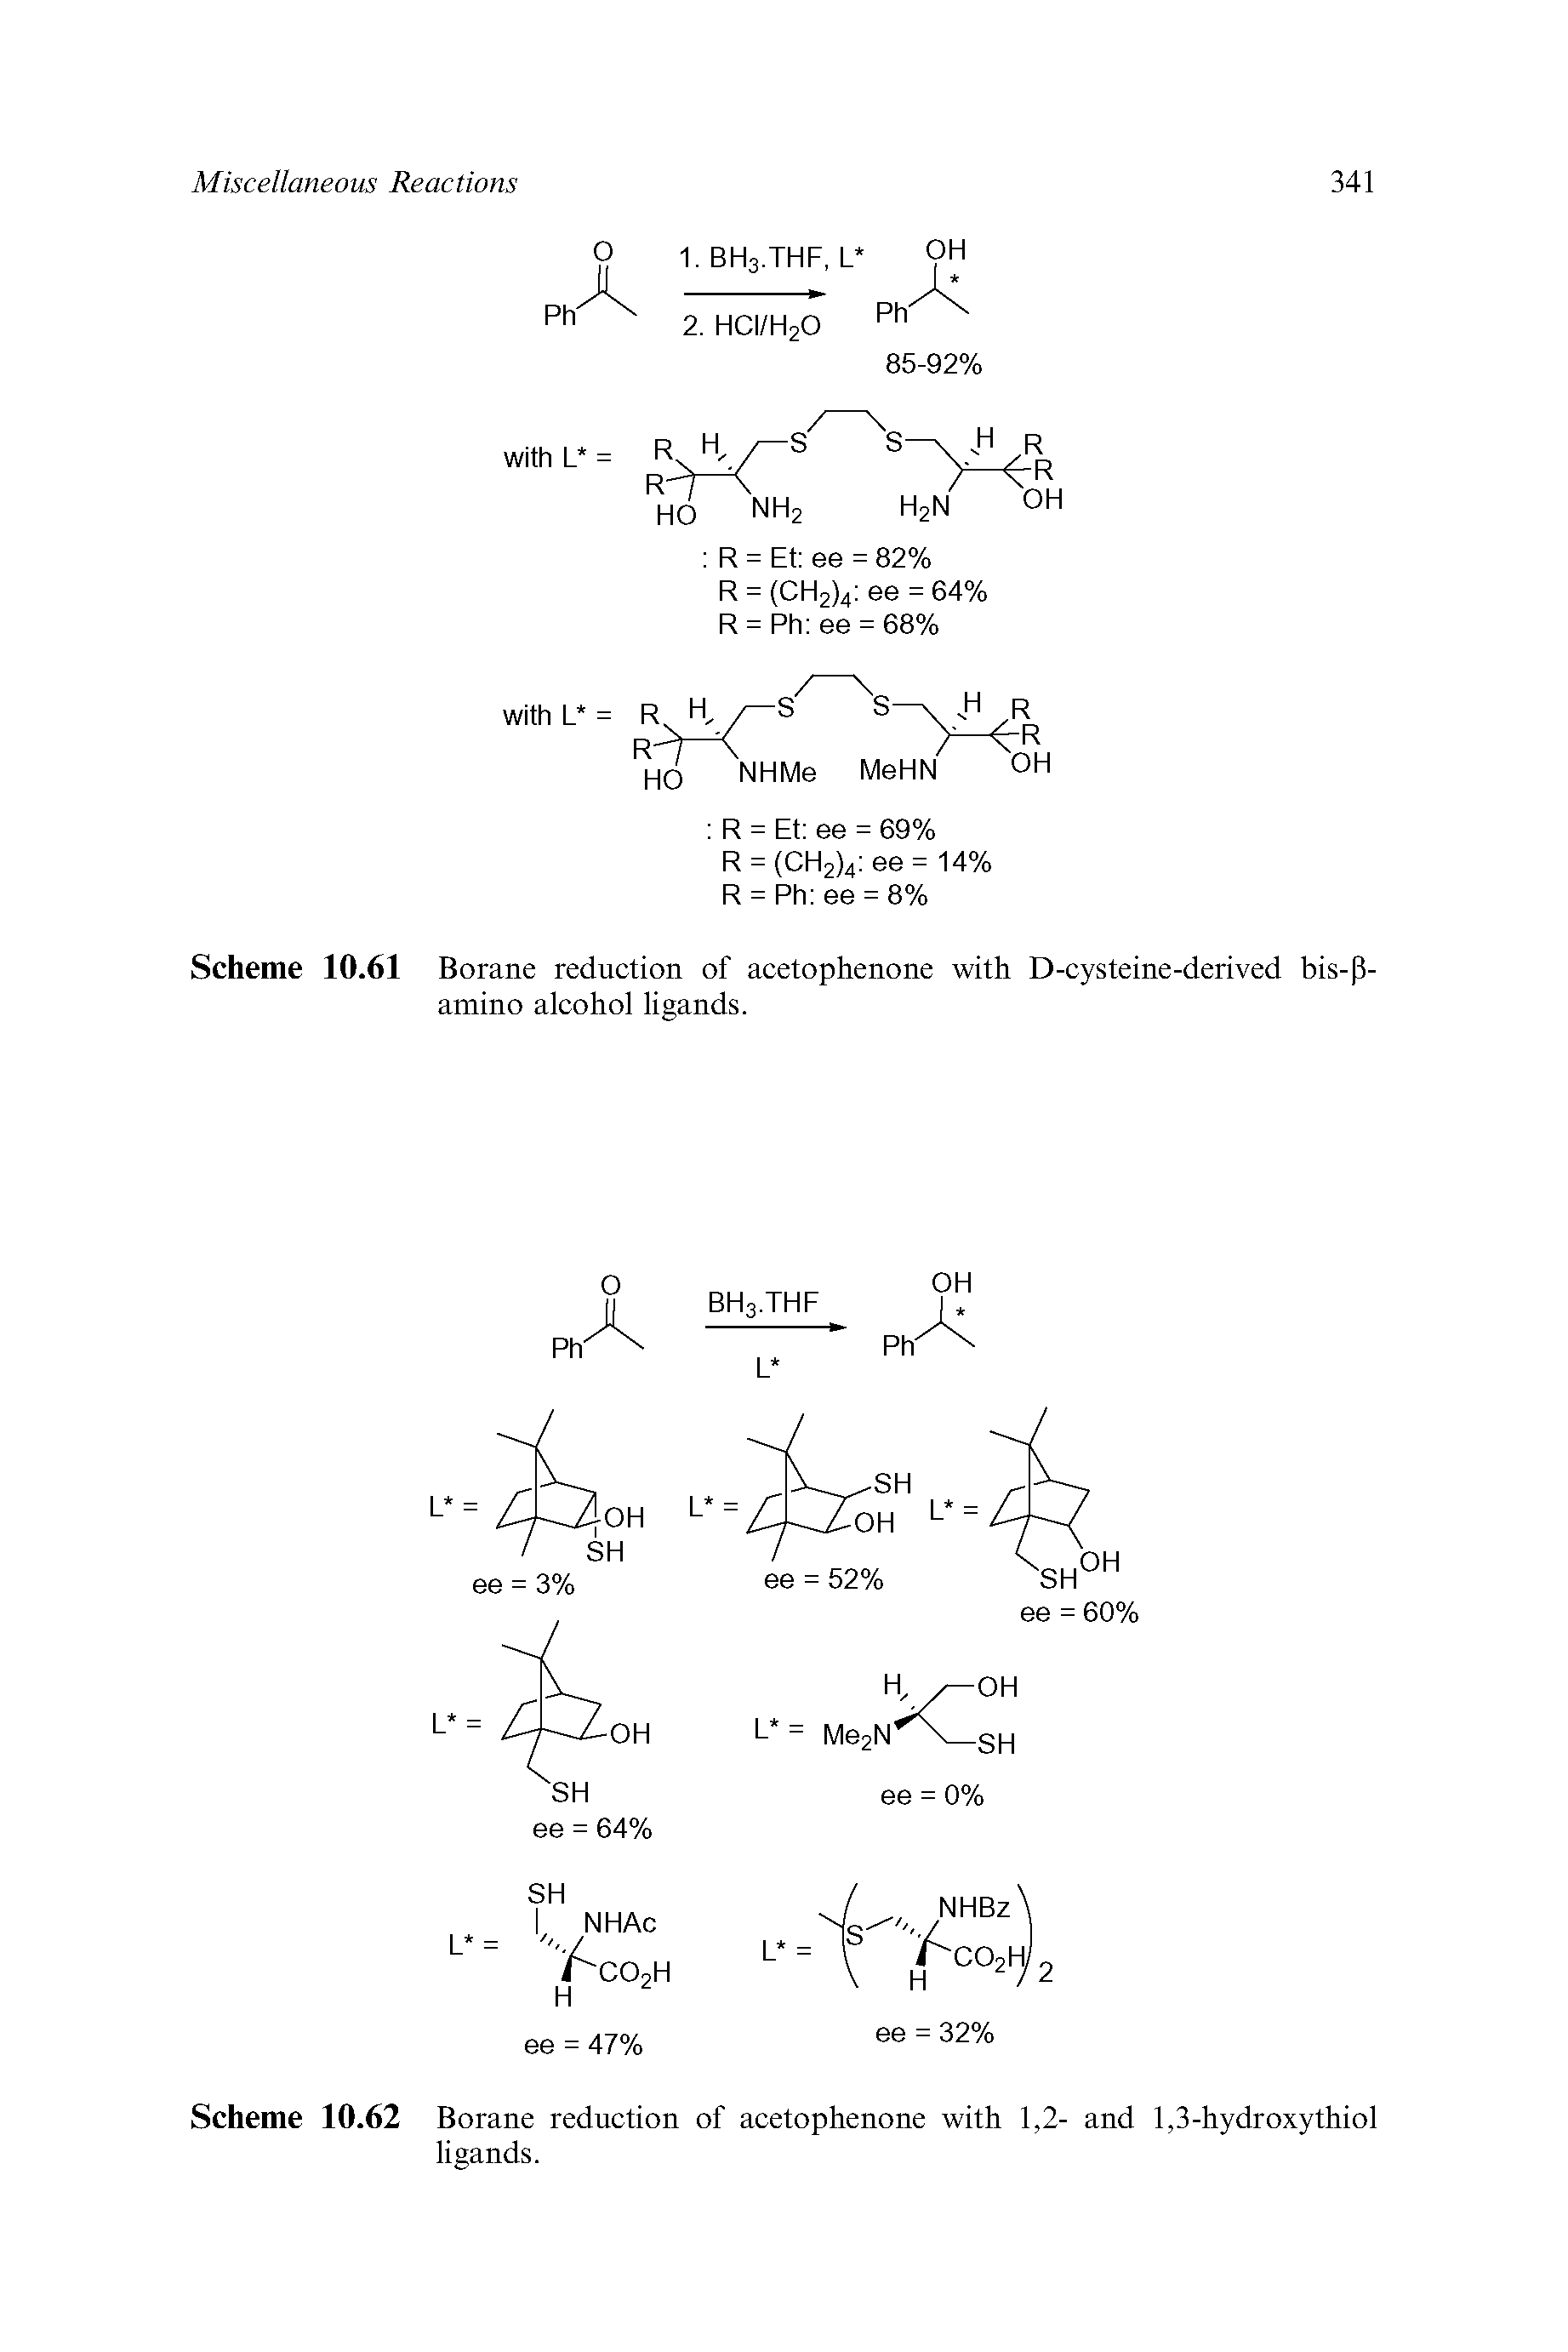 Scheme 10.61 Borane reduction of acetophenone with D-cysteine-derived bis-P-amino alcohol ligands.